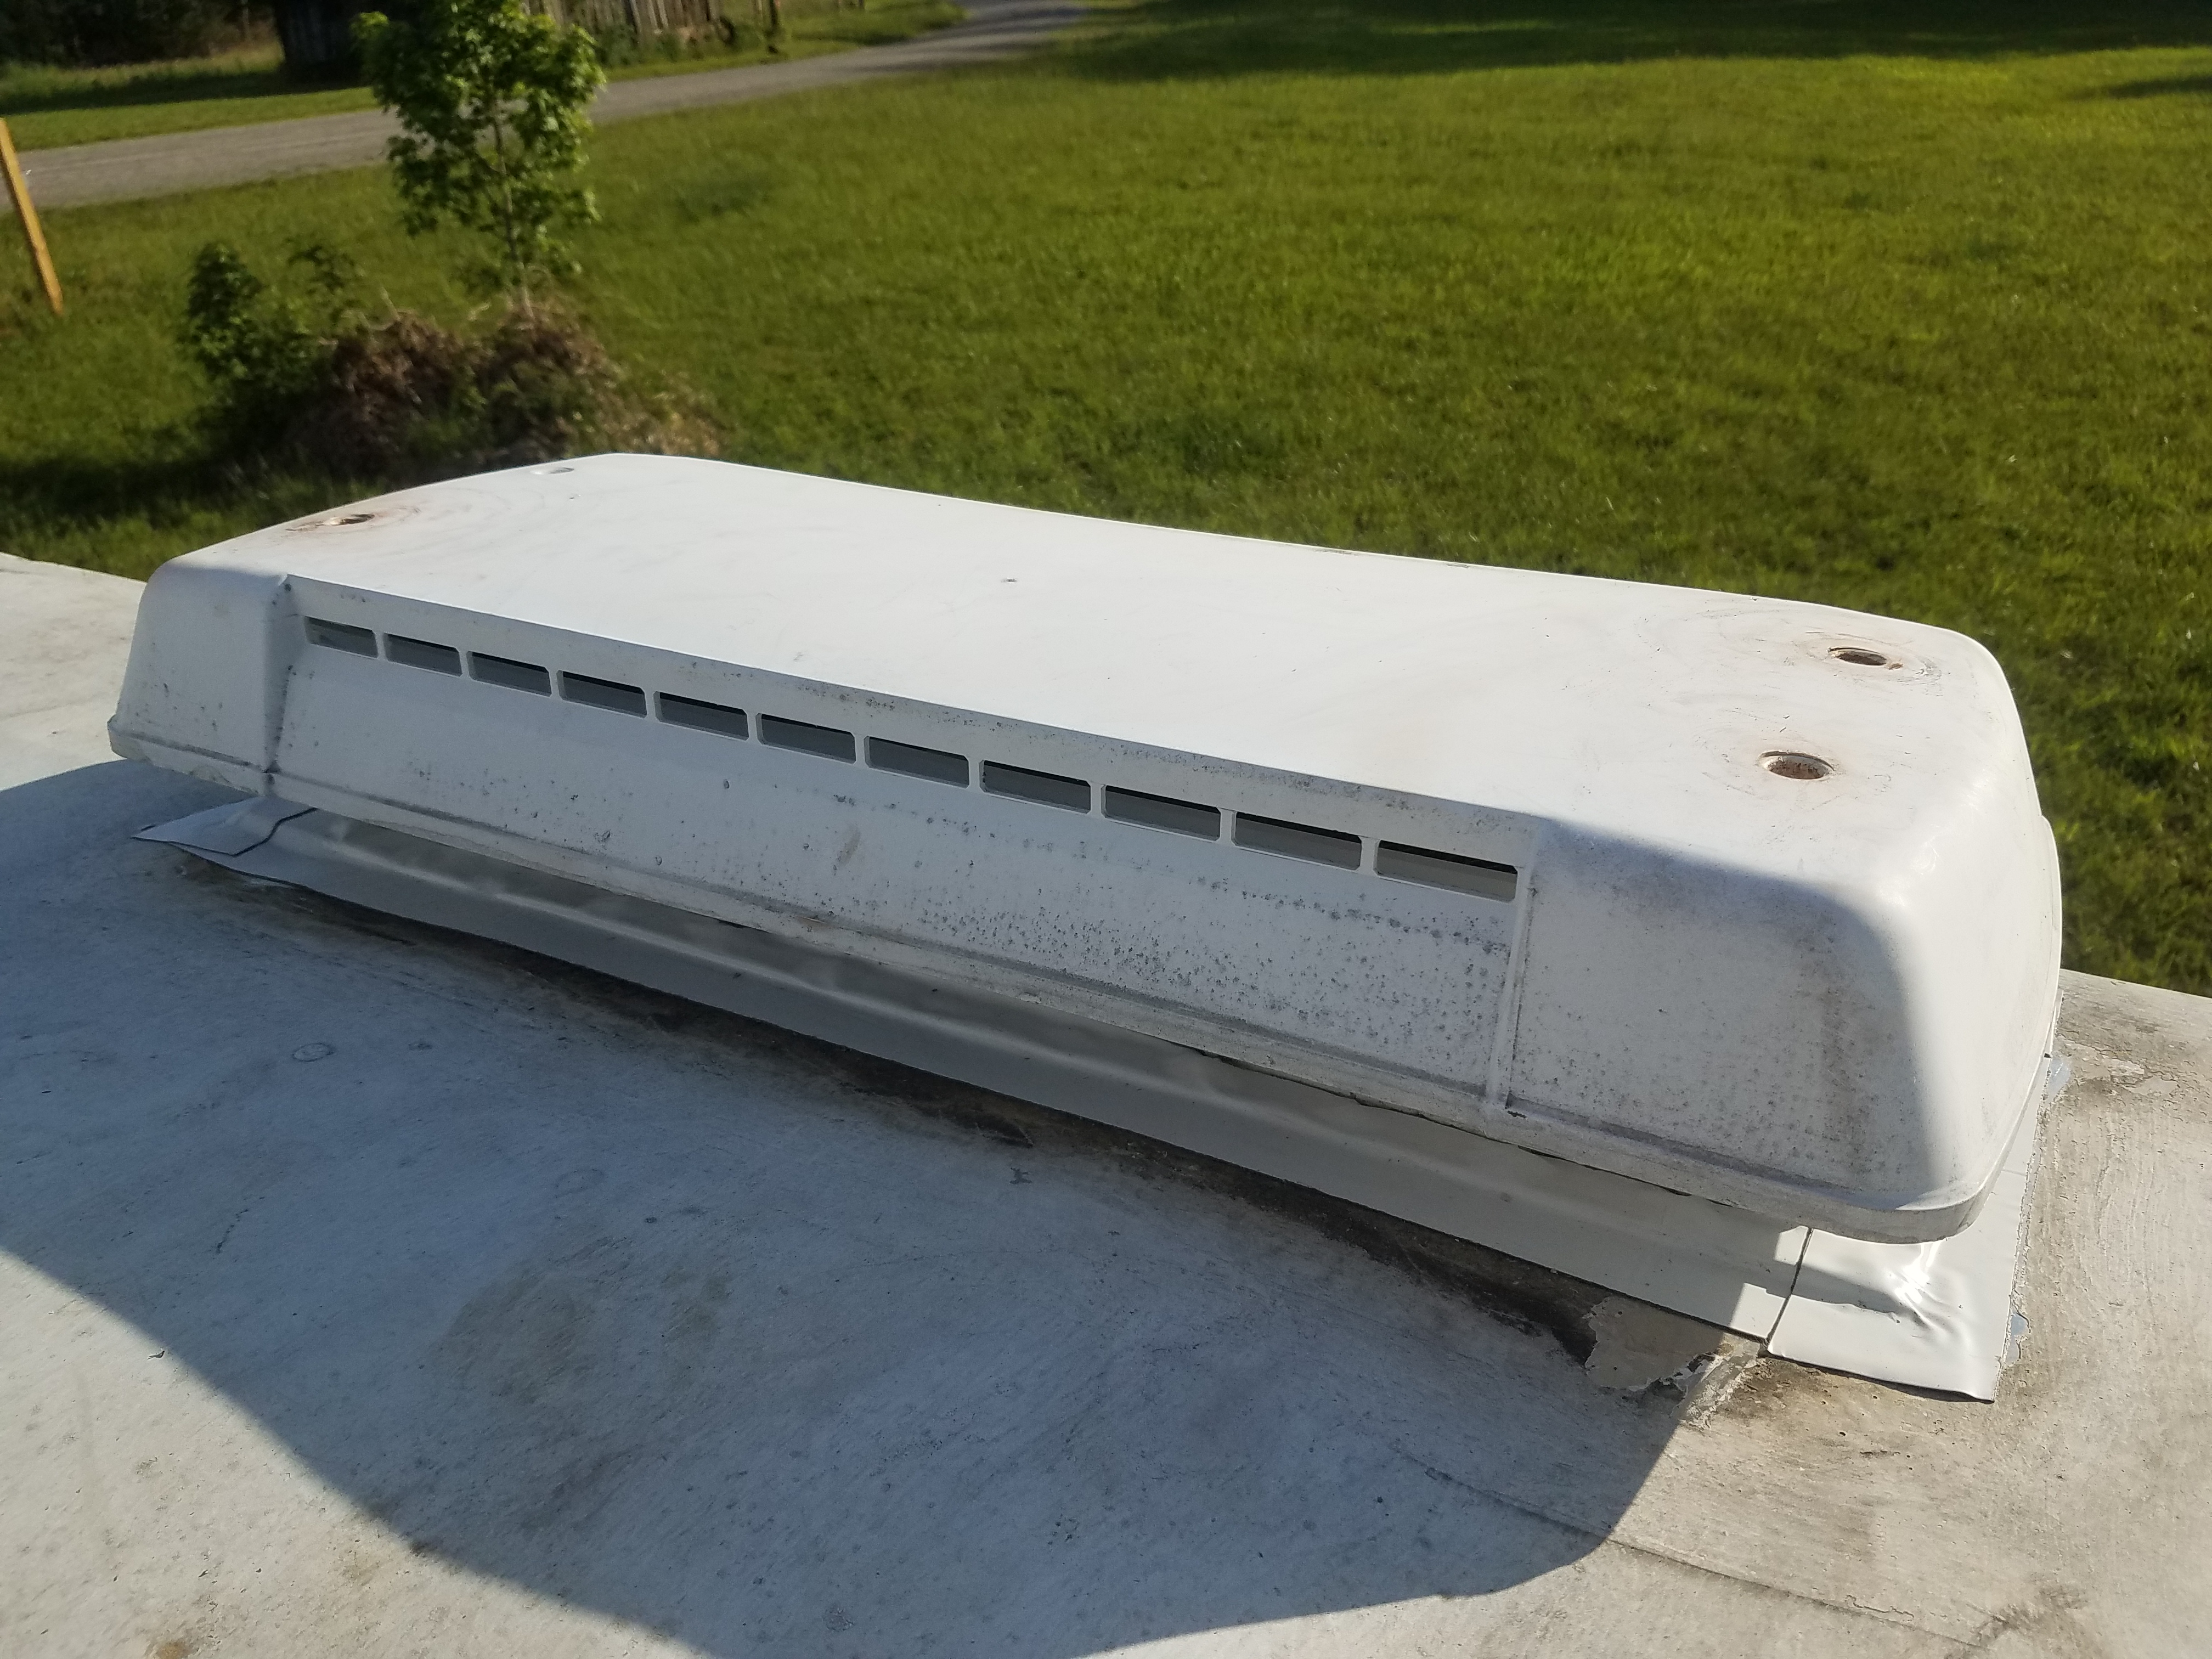 Refridgerator vent with the cover on the travel trailer roof